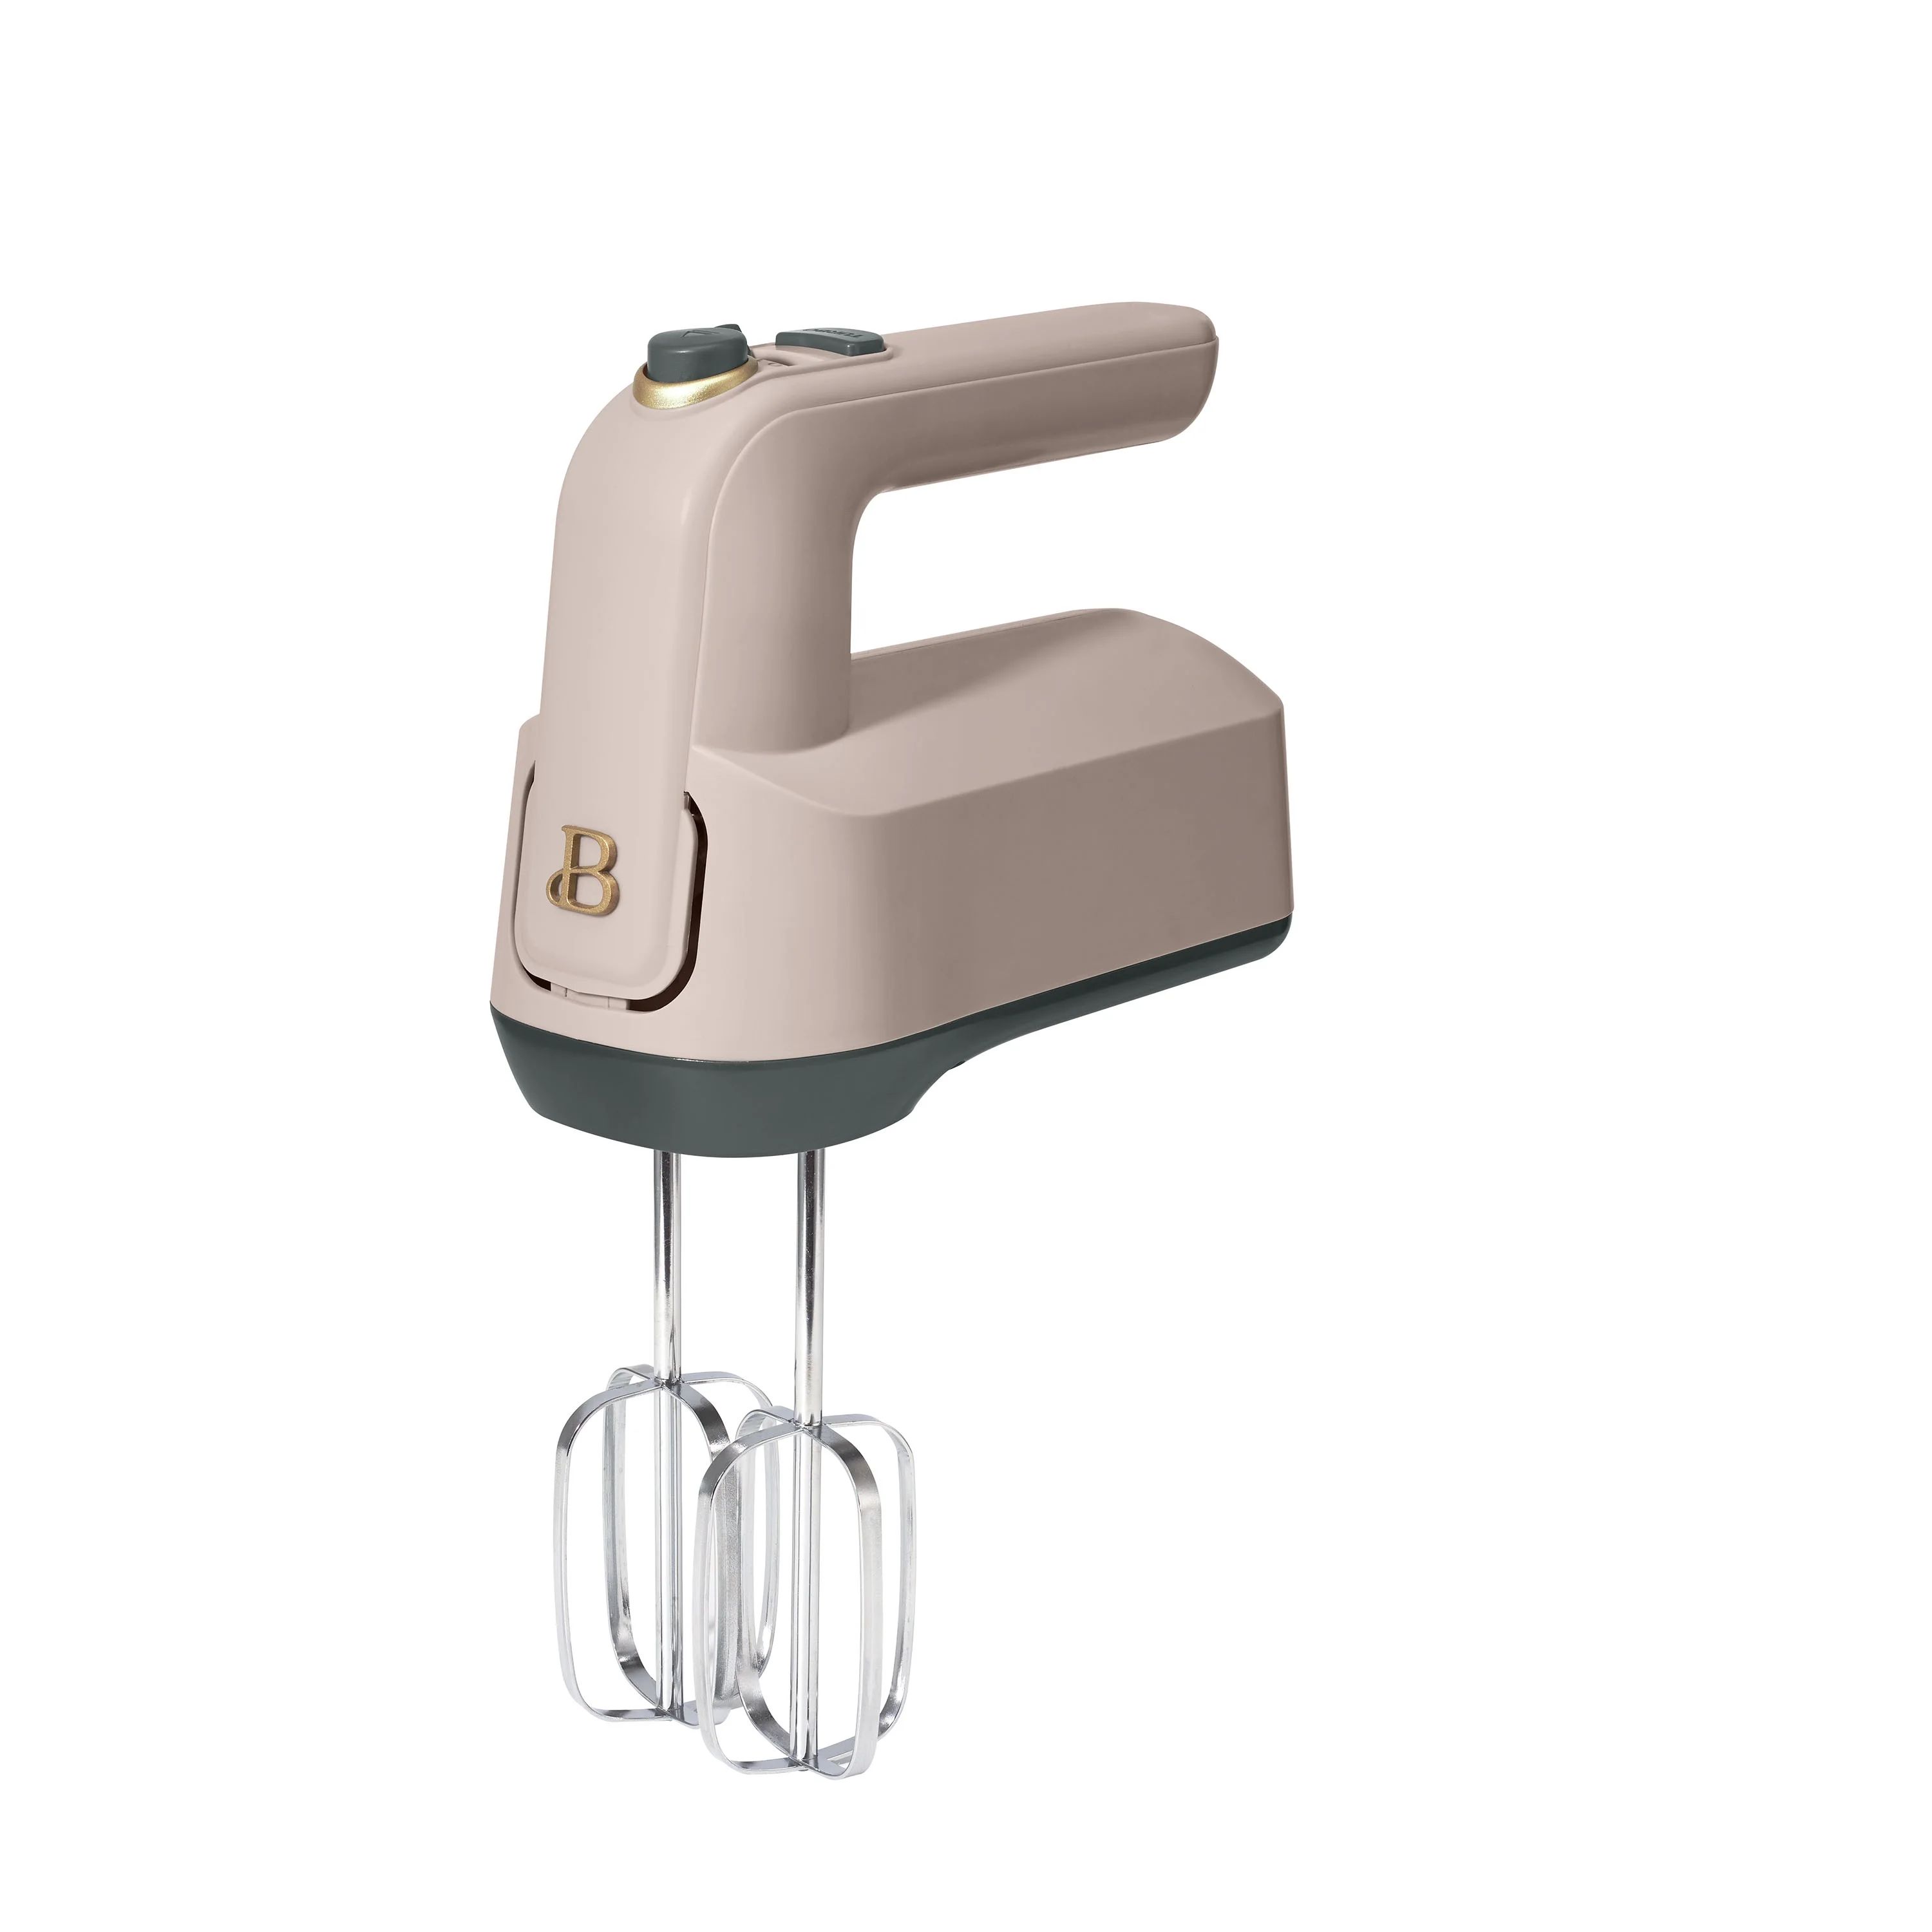 Beautiful 6-Speed Electric Hand Mixer, Porcini Taupe by Drew Barrymore | Walmart (US)